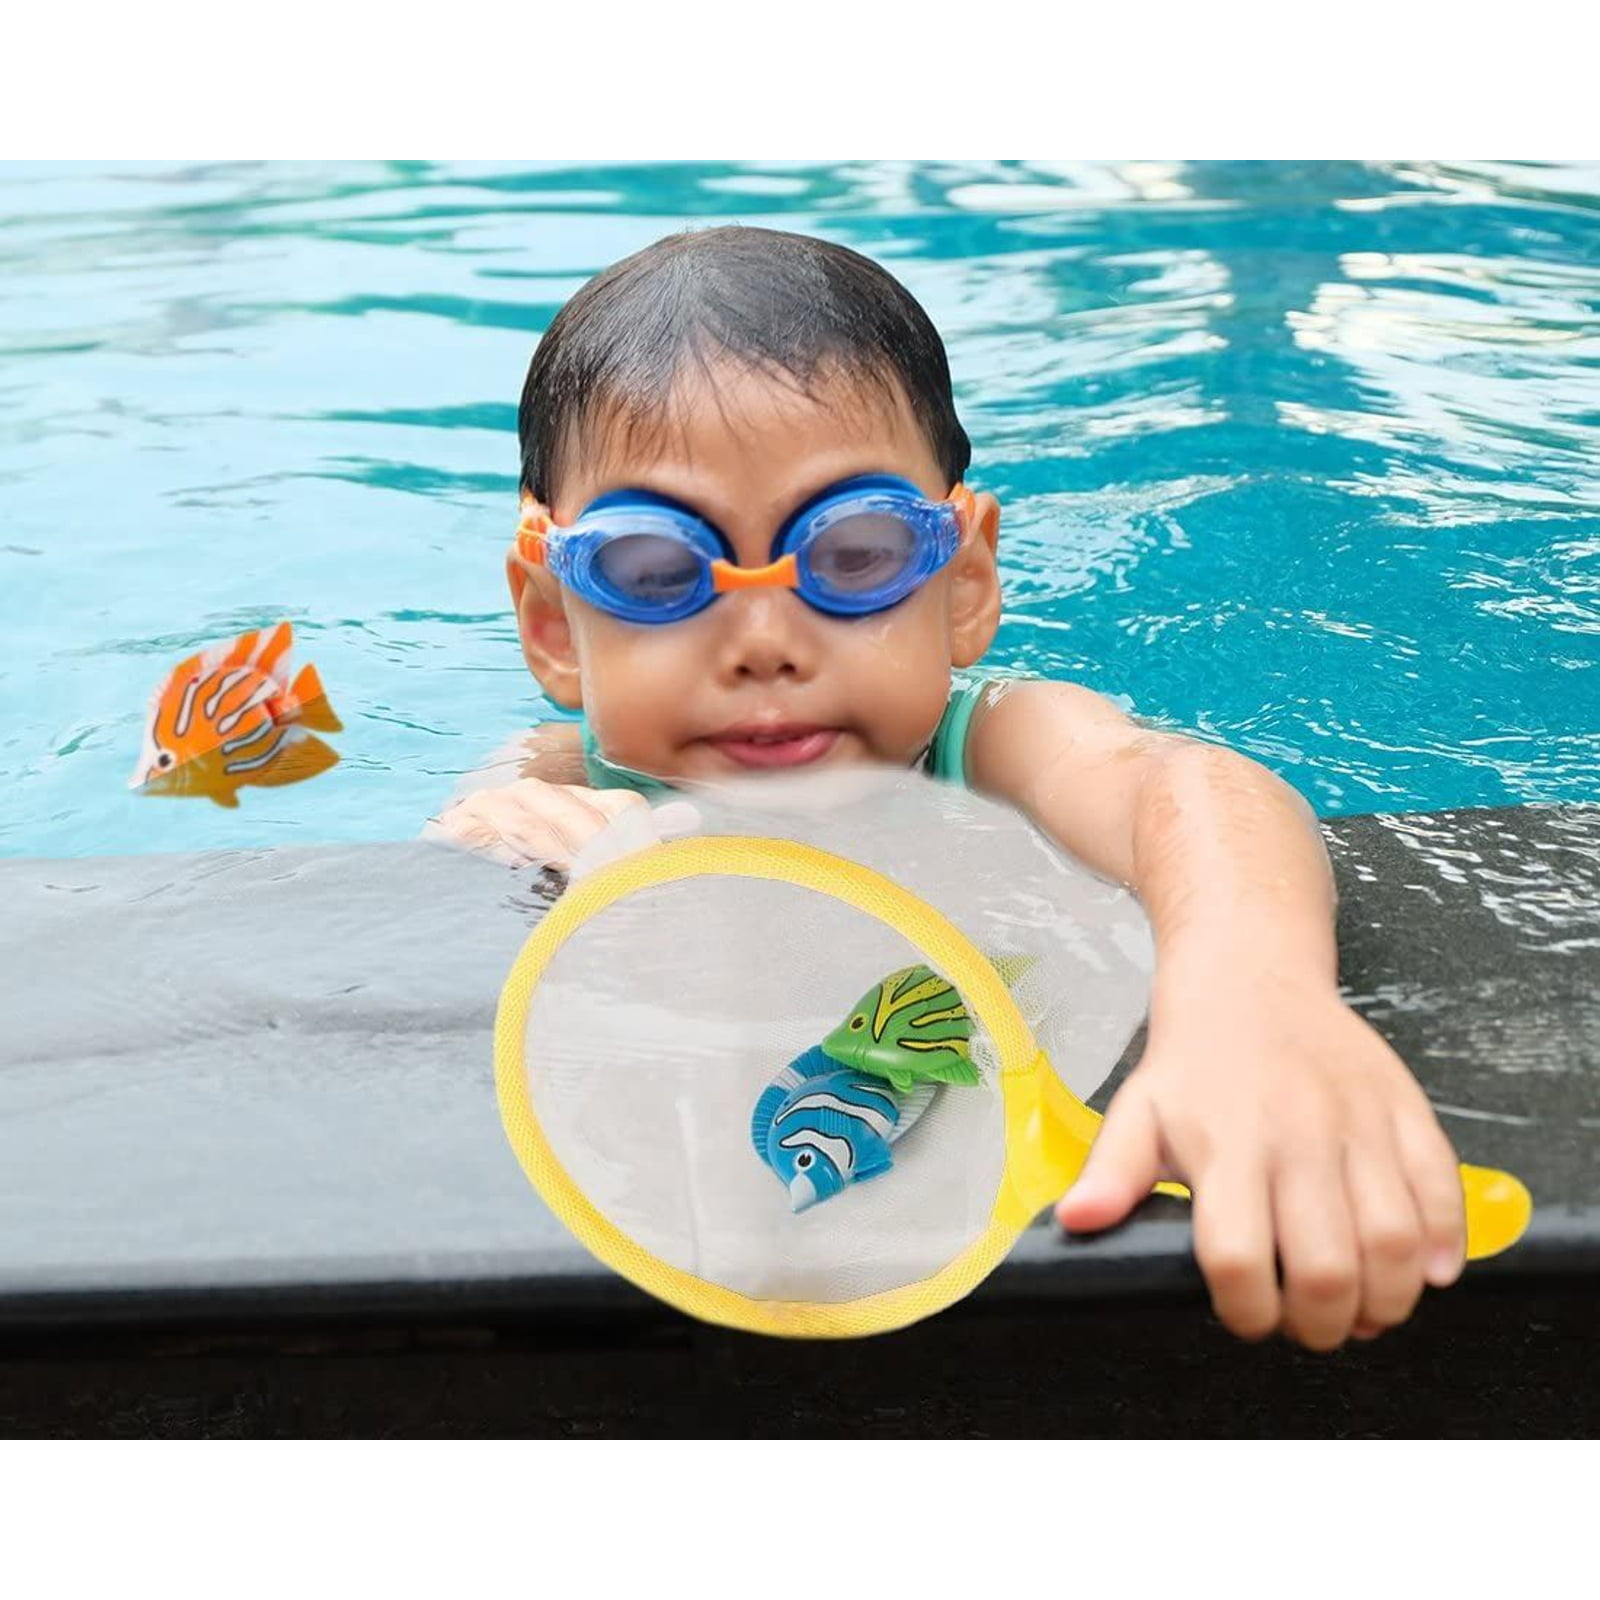 Summer Swimming Diving Fish Toys with Storage Bag Pool Underwater Games Training Gift for Boys and Girls 23 PCS Swimming Pool Toys Set for Kids YOSHOOT Diving Toys 